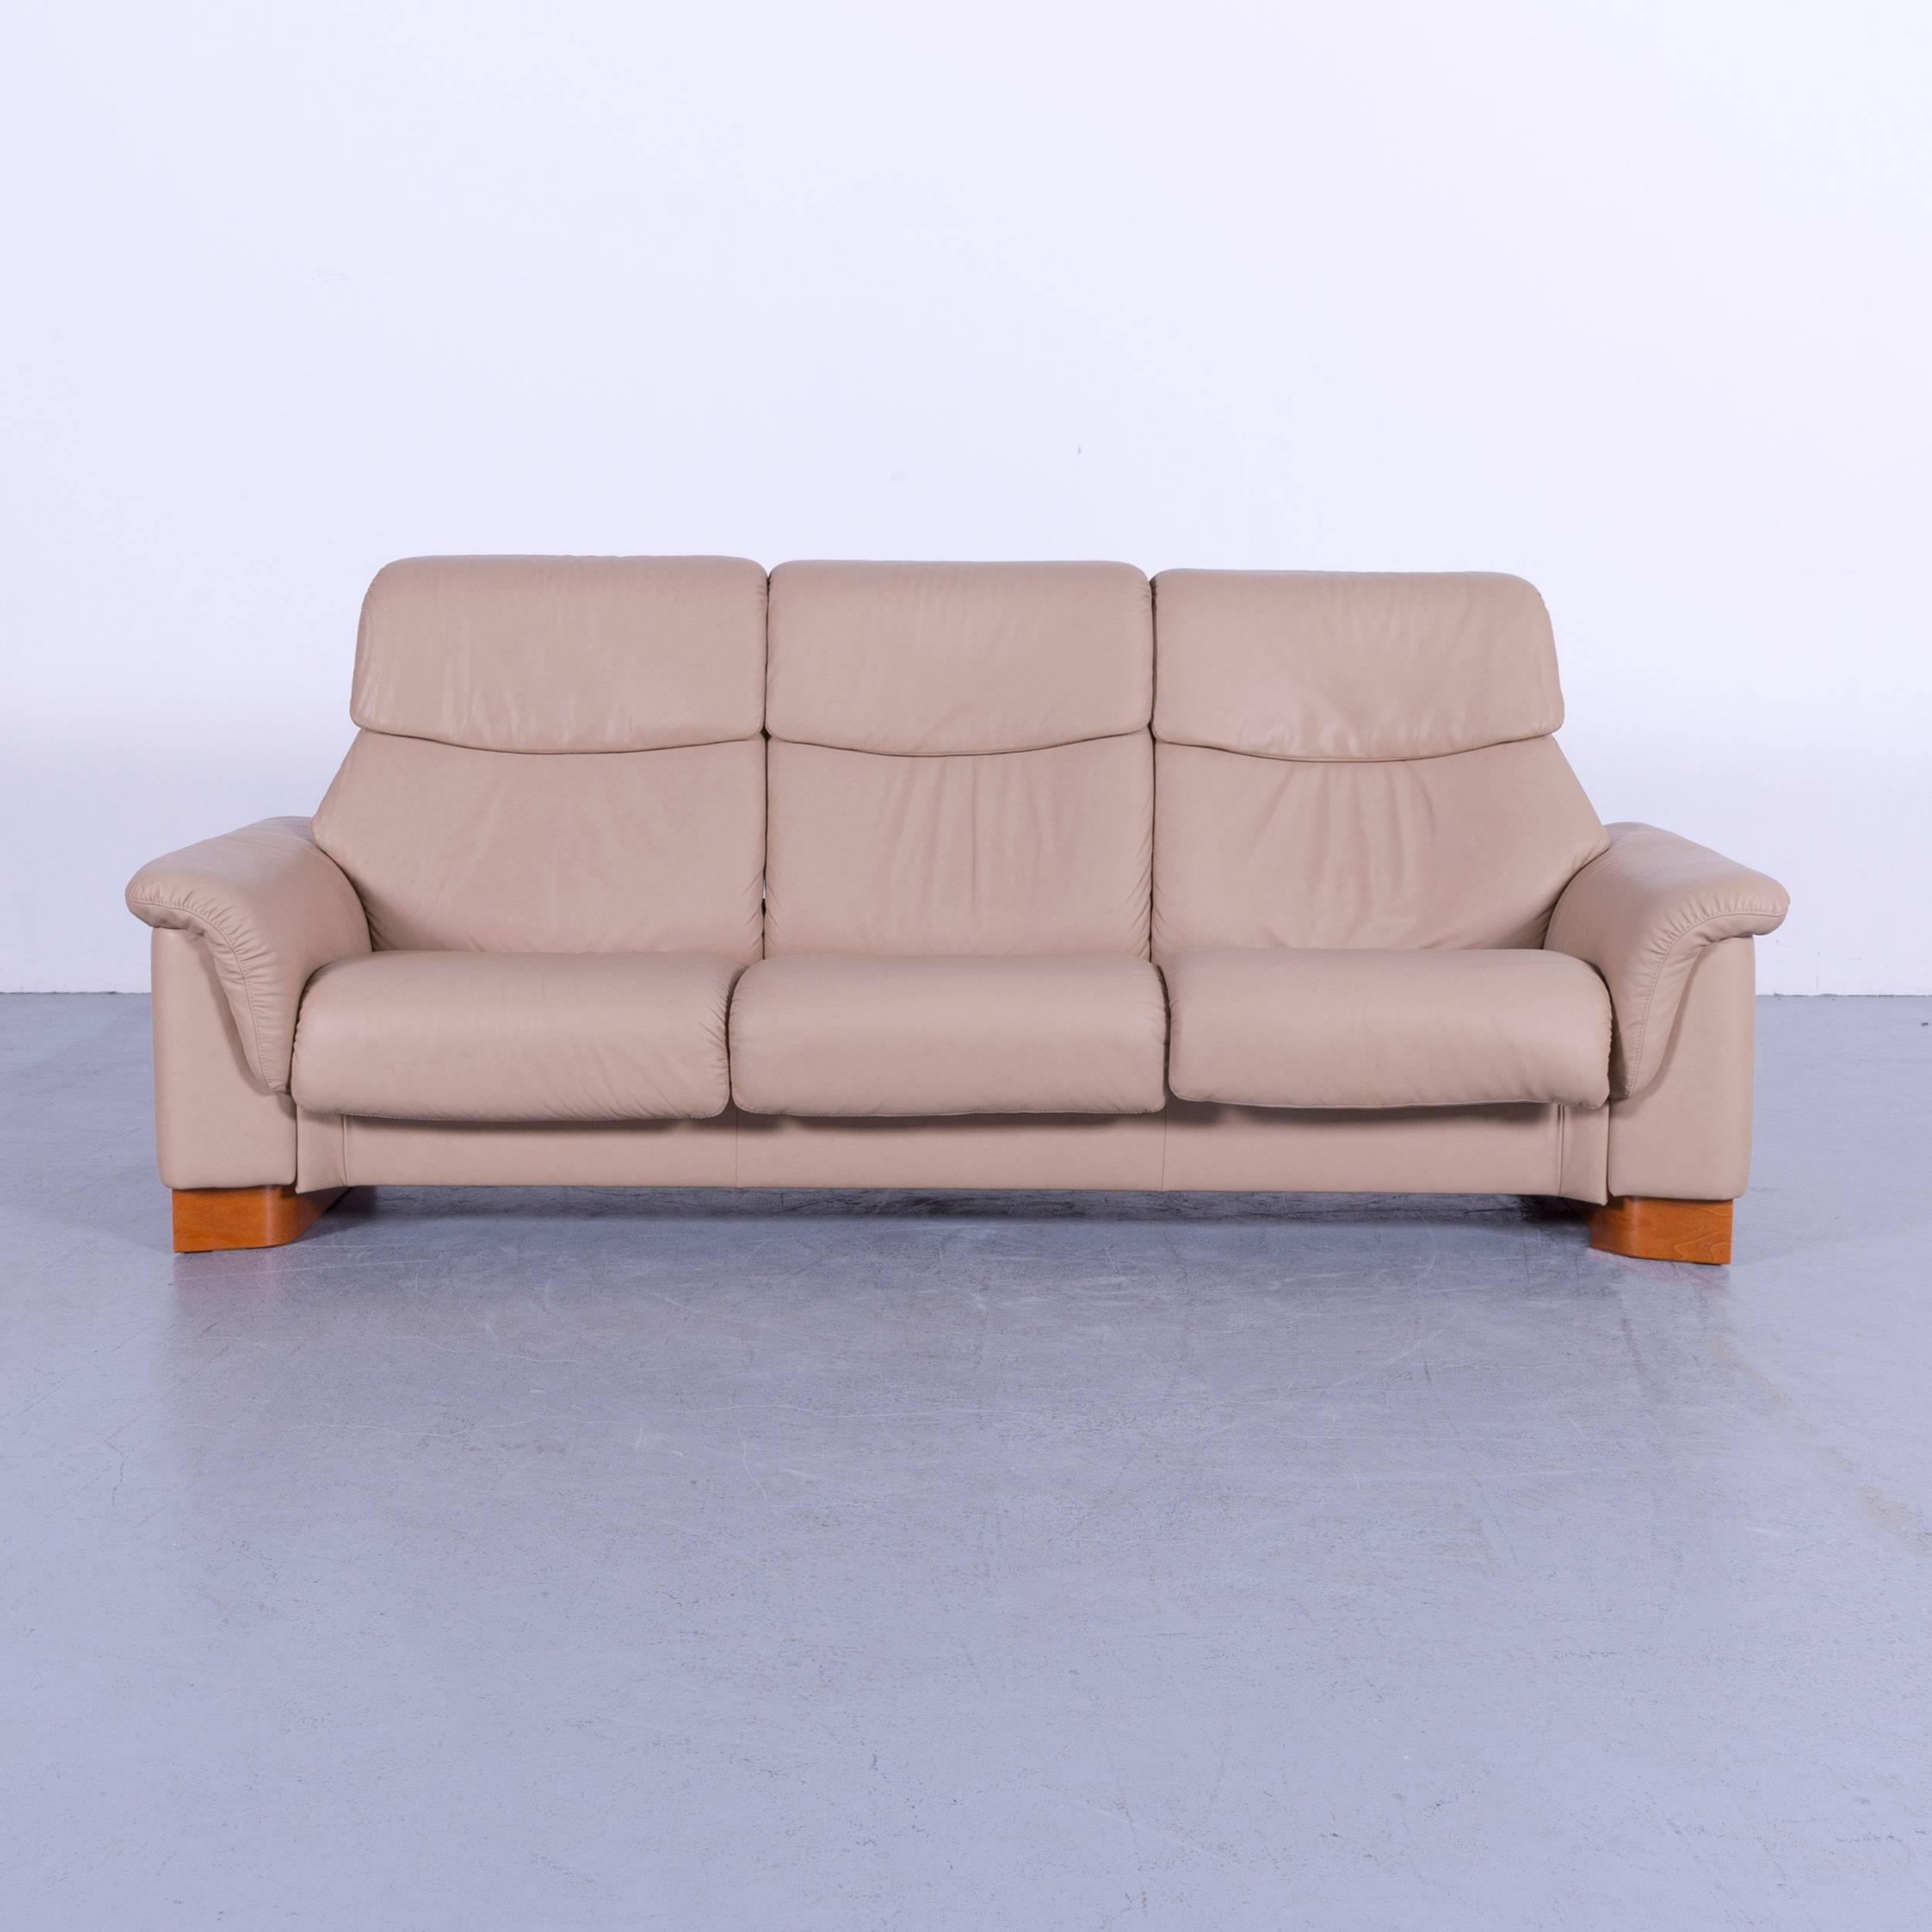 We bring to you an Ekornes Stressless paradise sofa set beige leather three-seat recliner.















         